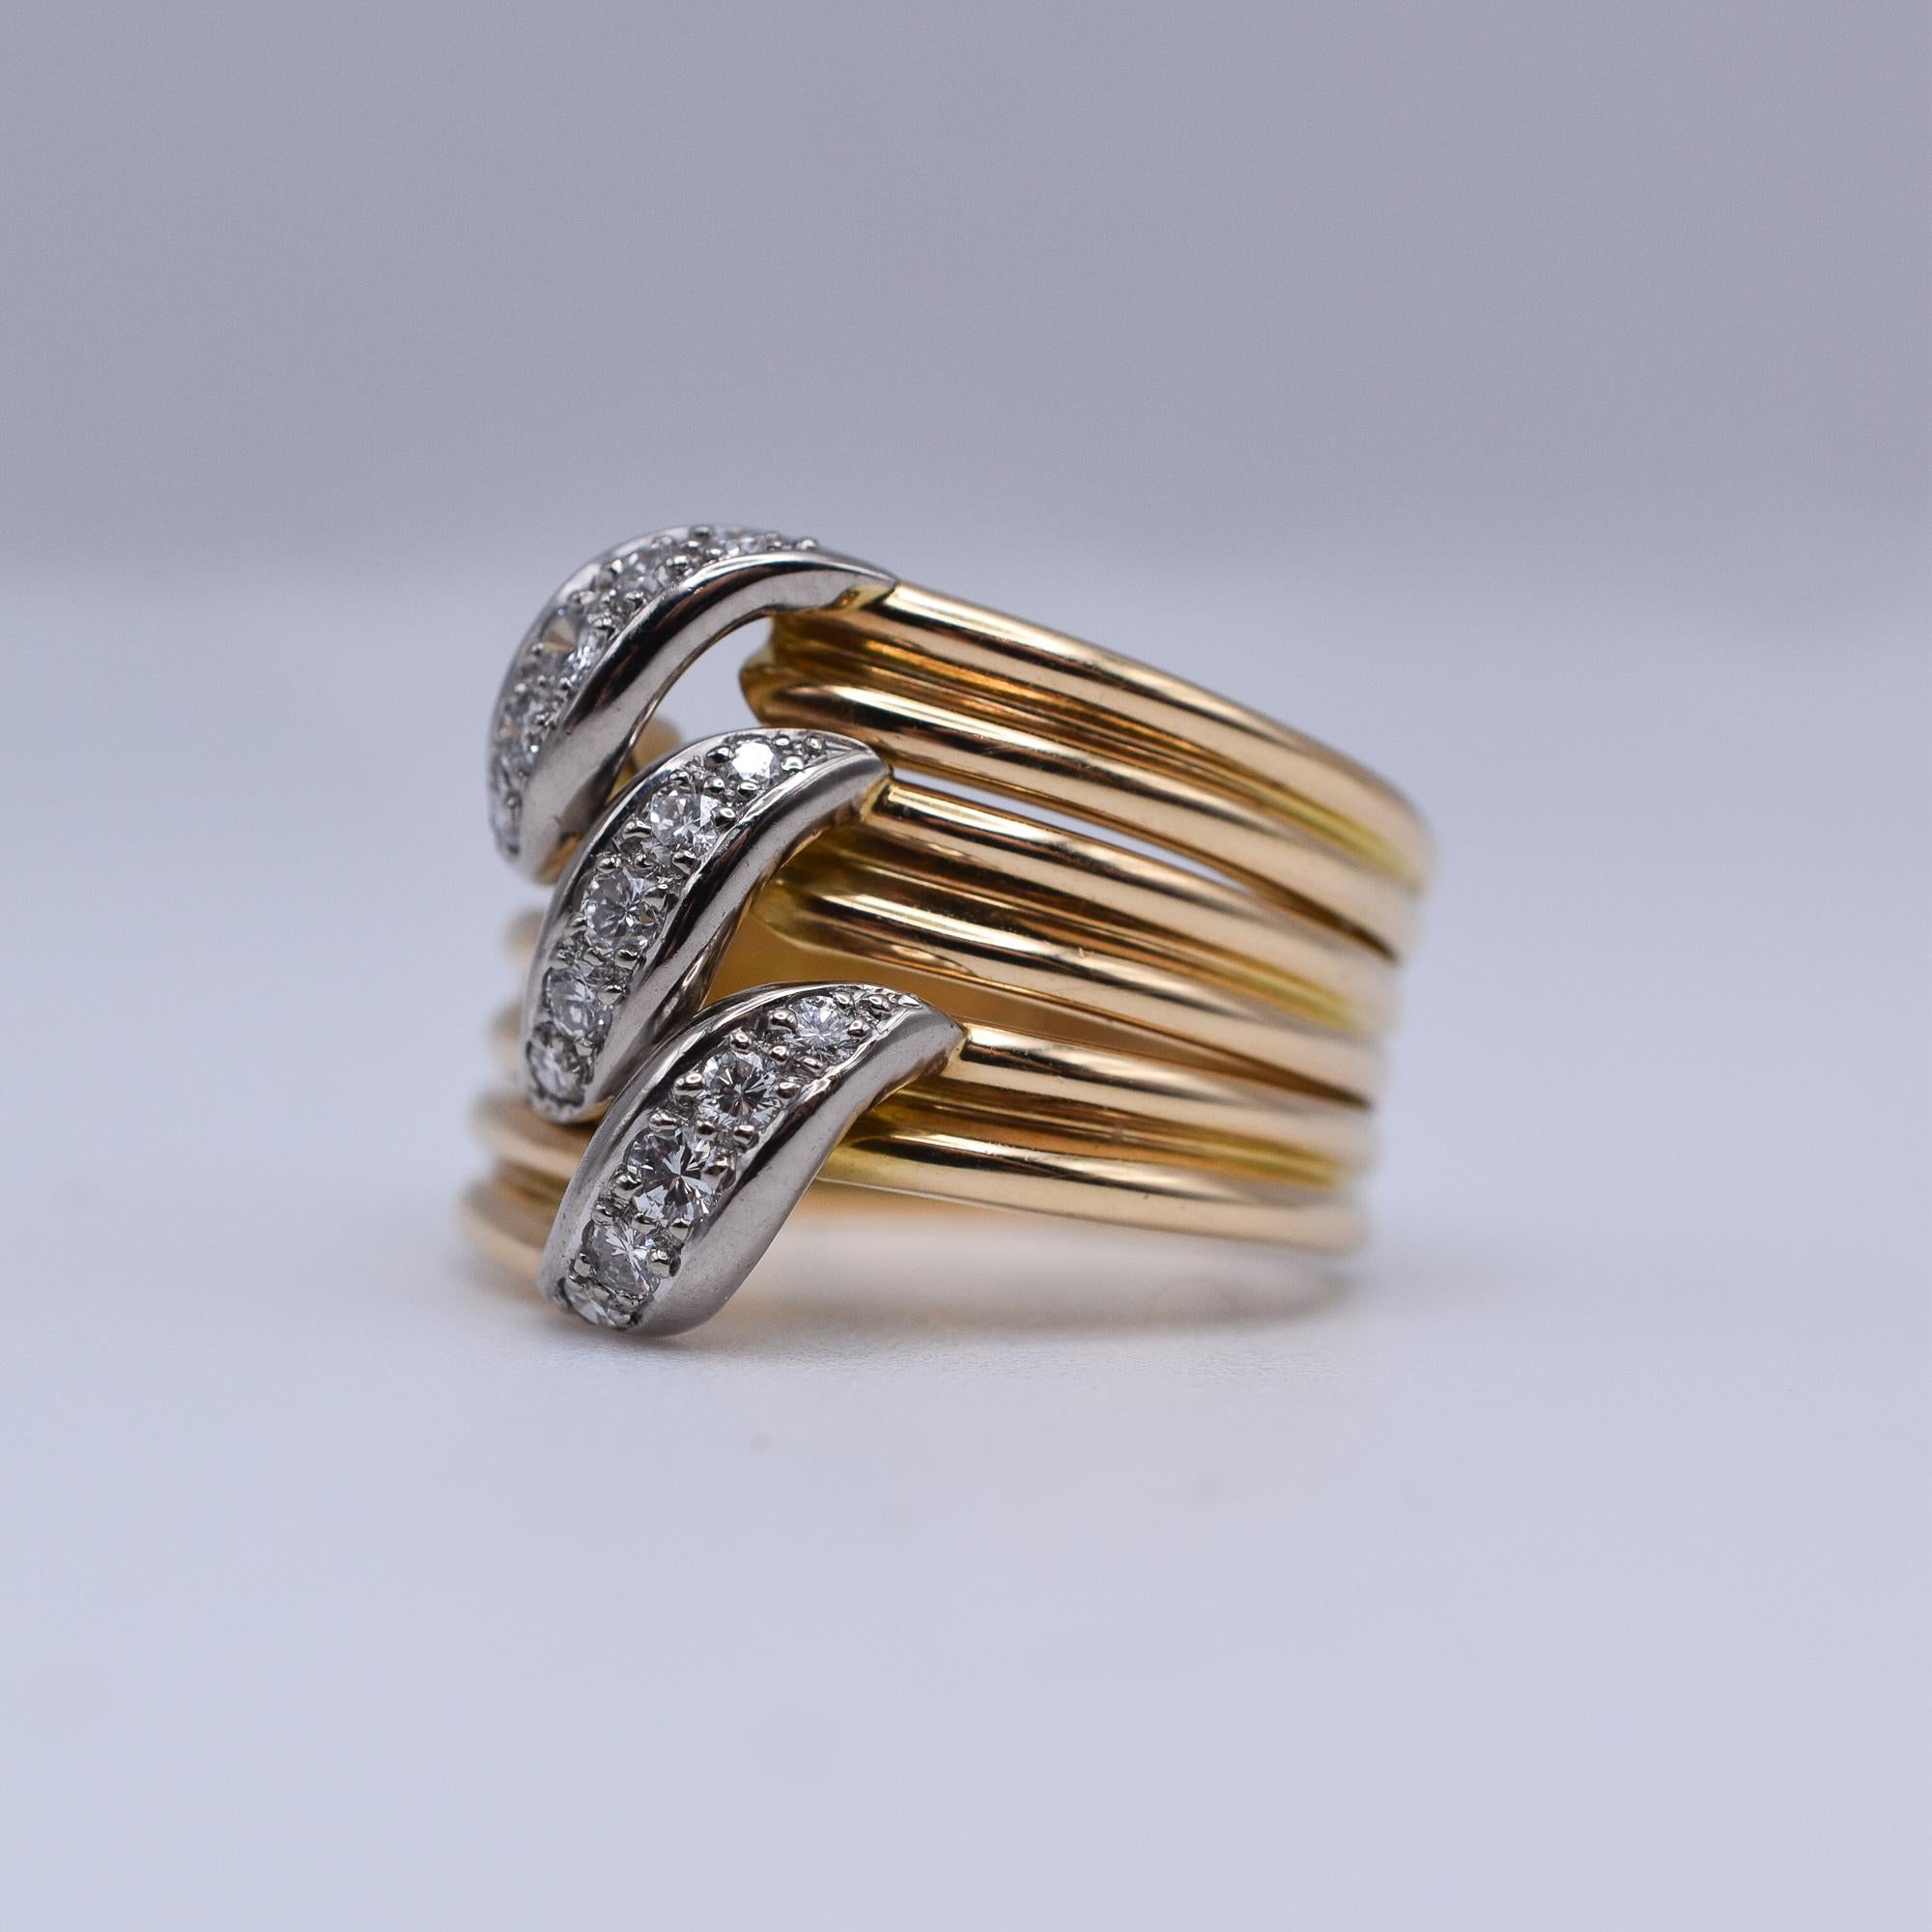 Cartier Gold and Diamond Trinity Ring
A gold and diamond three-row band ring mounted in 18k yellow gold and platinum, with approximately 0.30 ct. diamonds. Made in France, circa 1960. Signed Cartier with Serial Number.

Ring Size: US 7